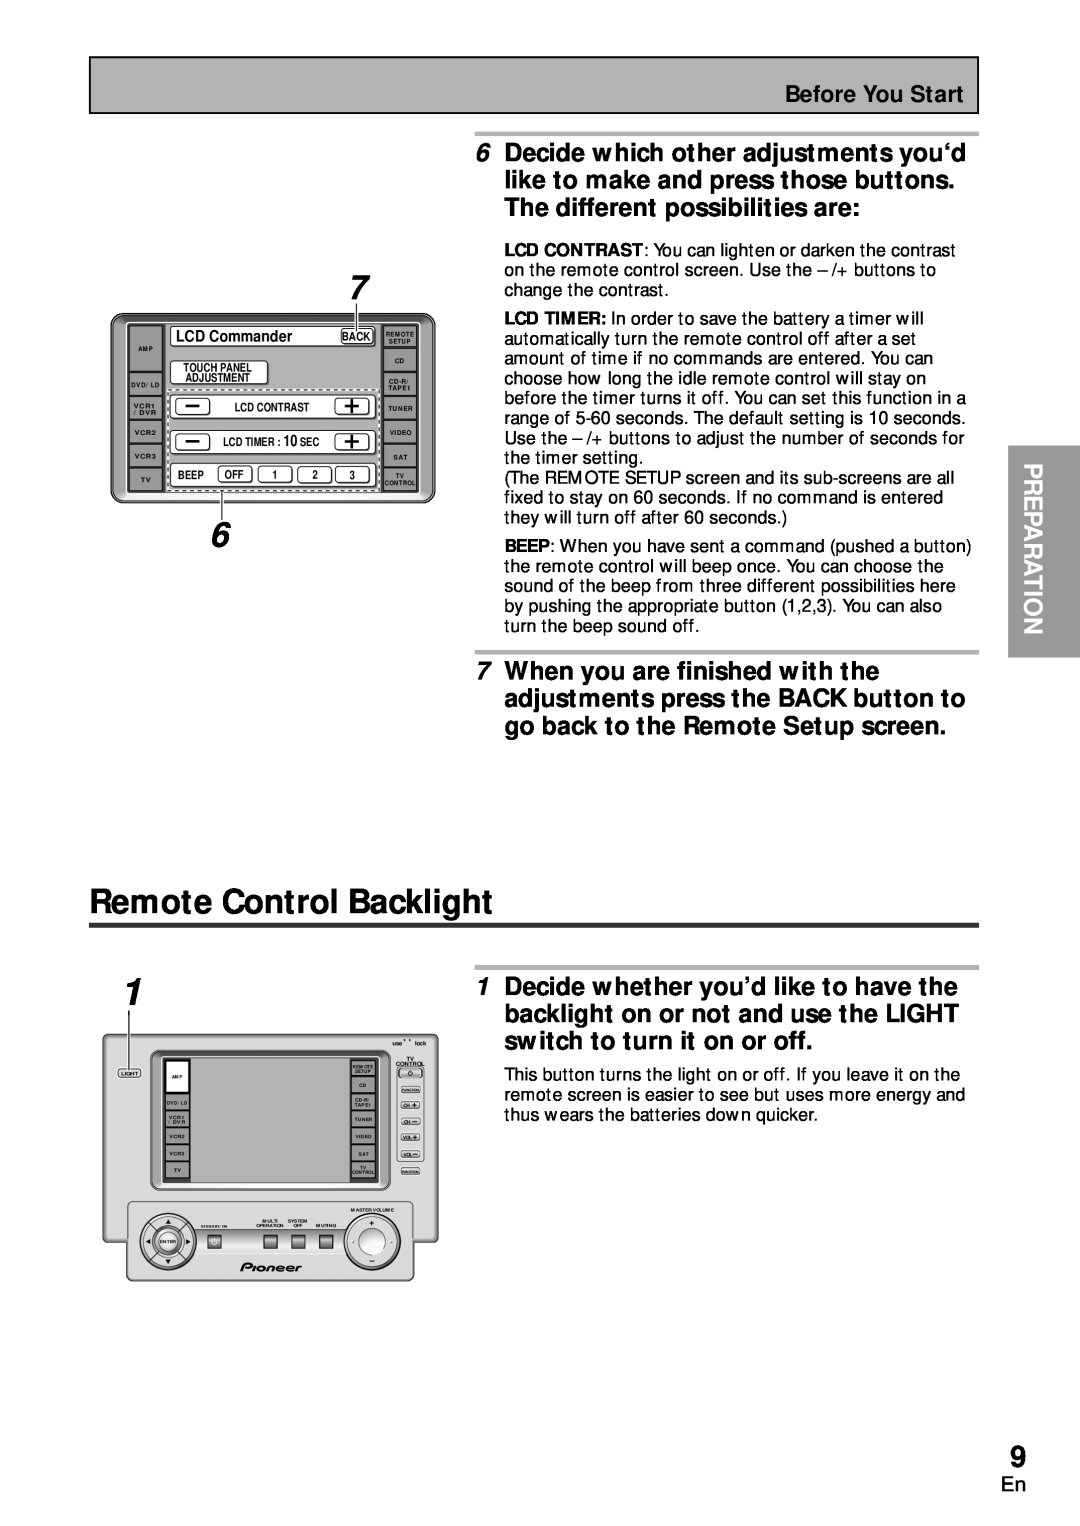 Pioneer VSA-AX10 operating instructions Remote Control Backlight, Preparation 